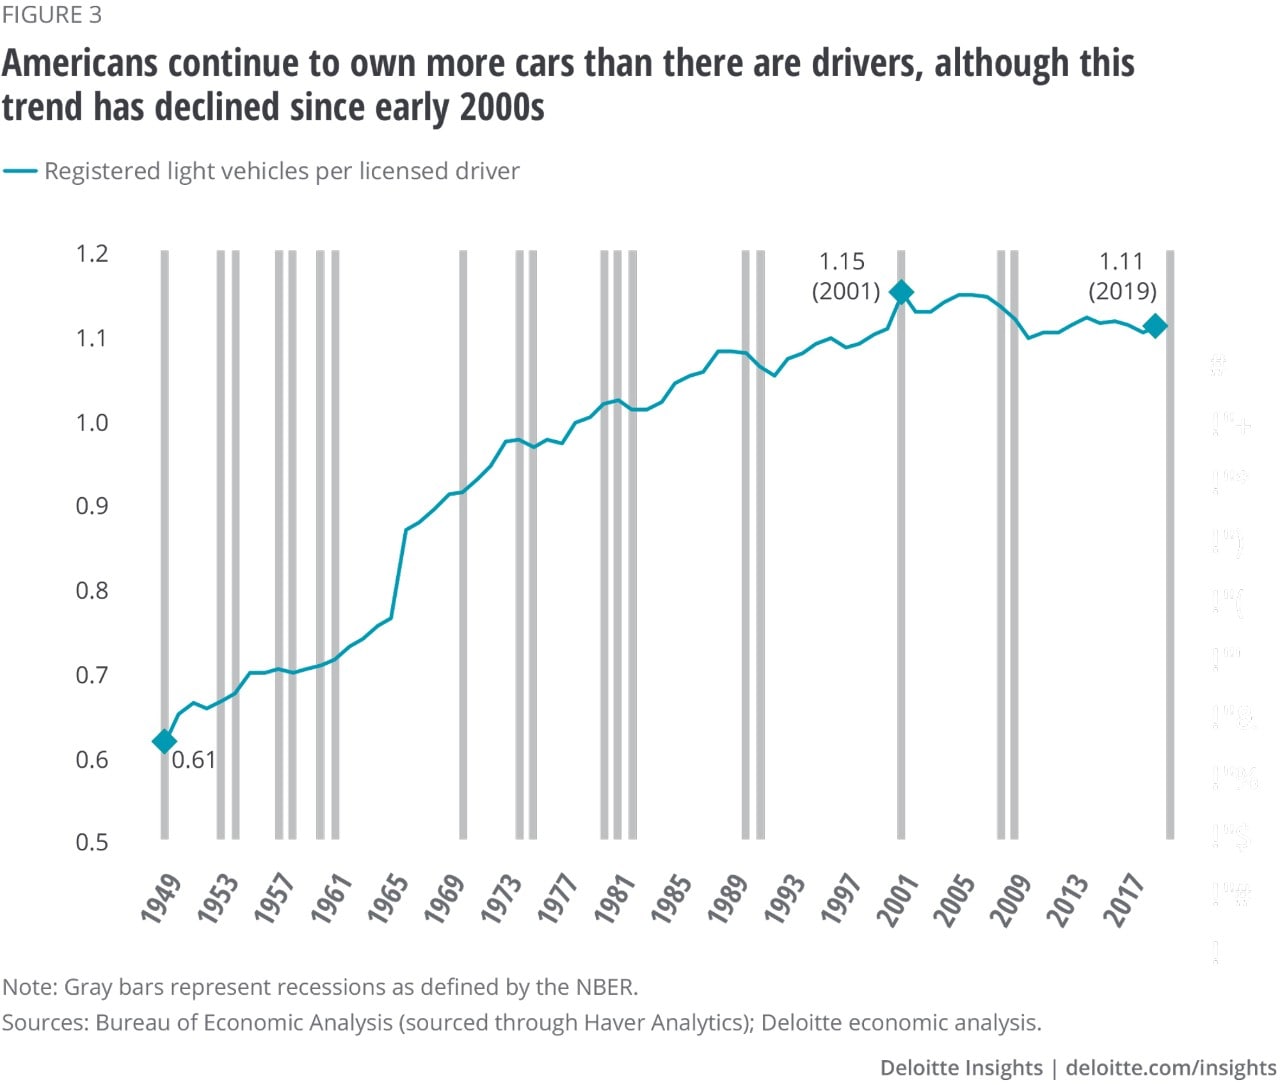 Figure 3. Americans continue to own more cars than there are drivers, although this trend has declined since early 2000